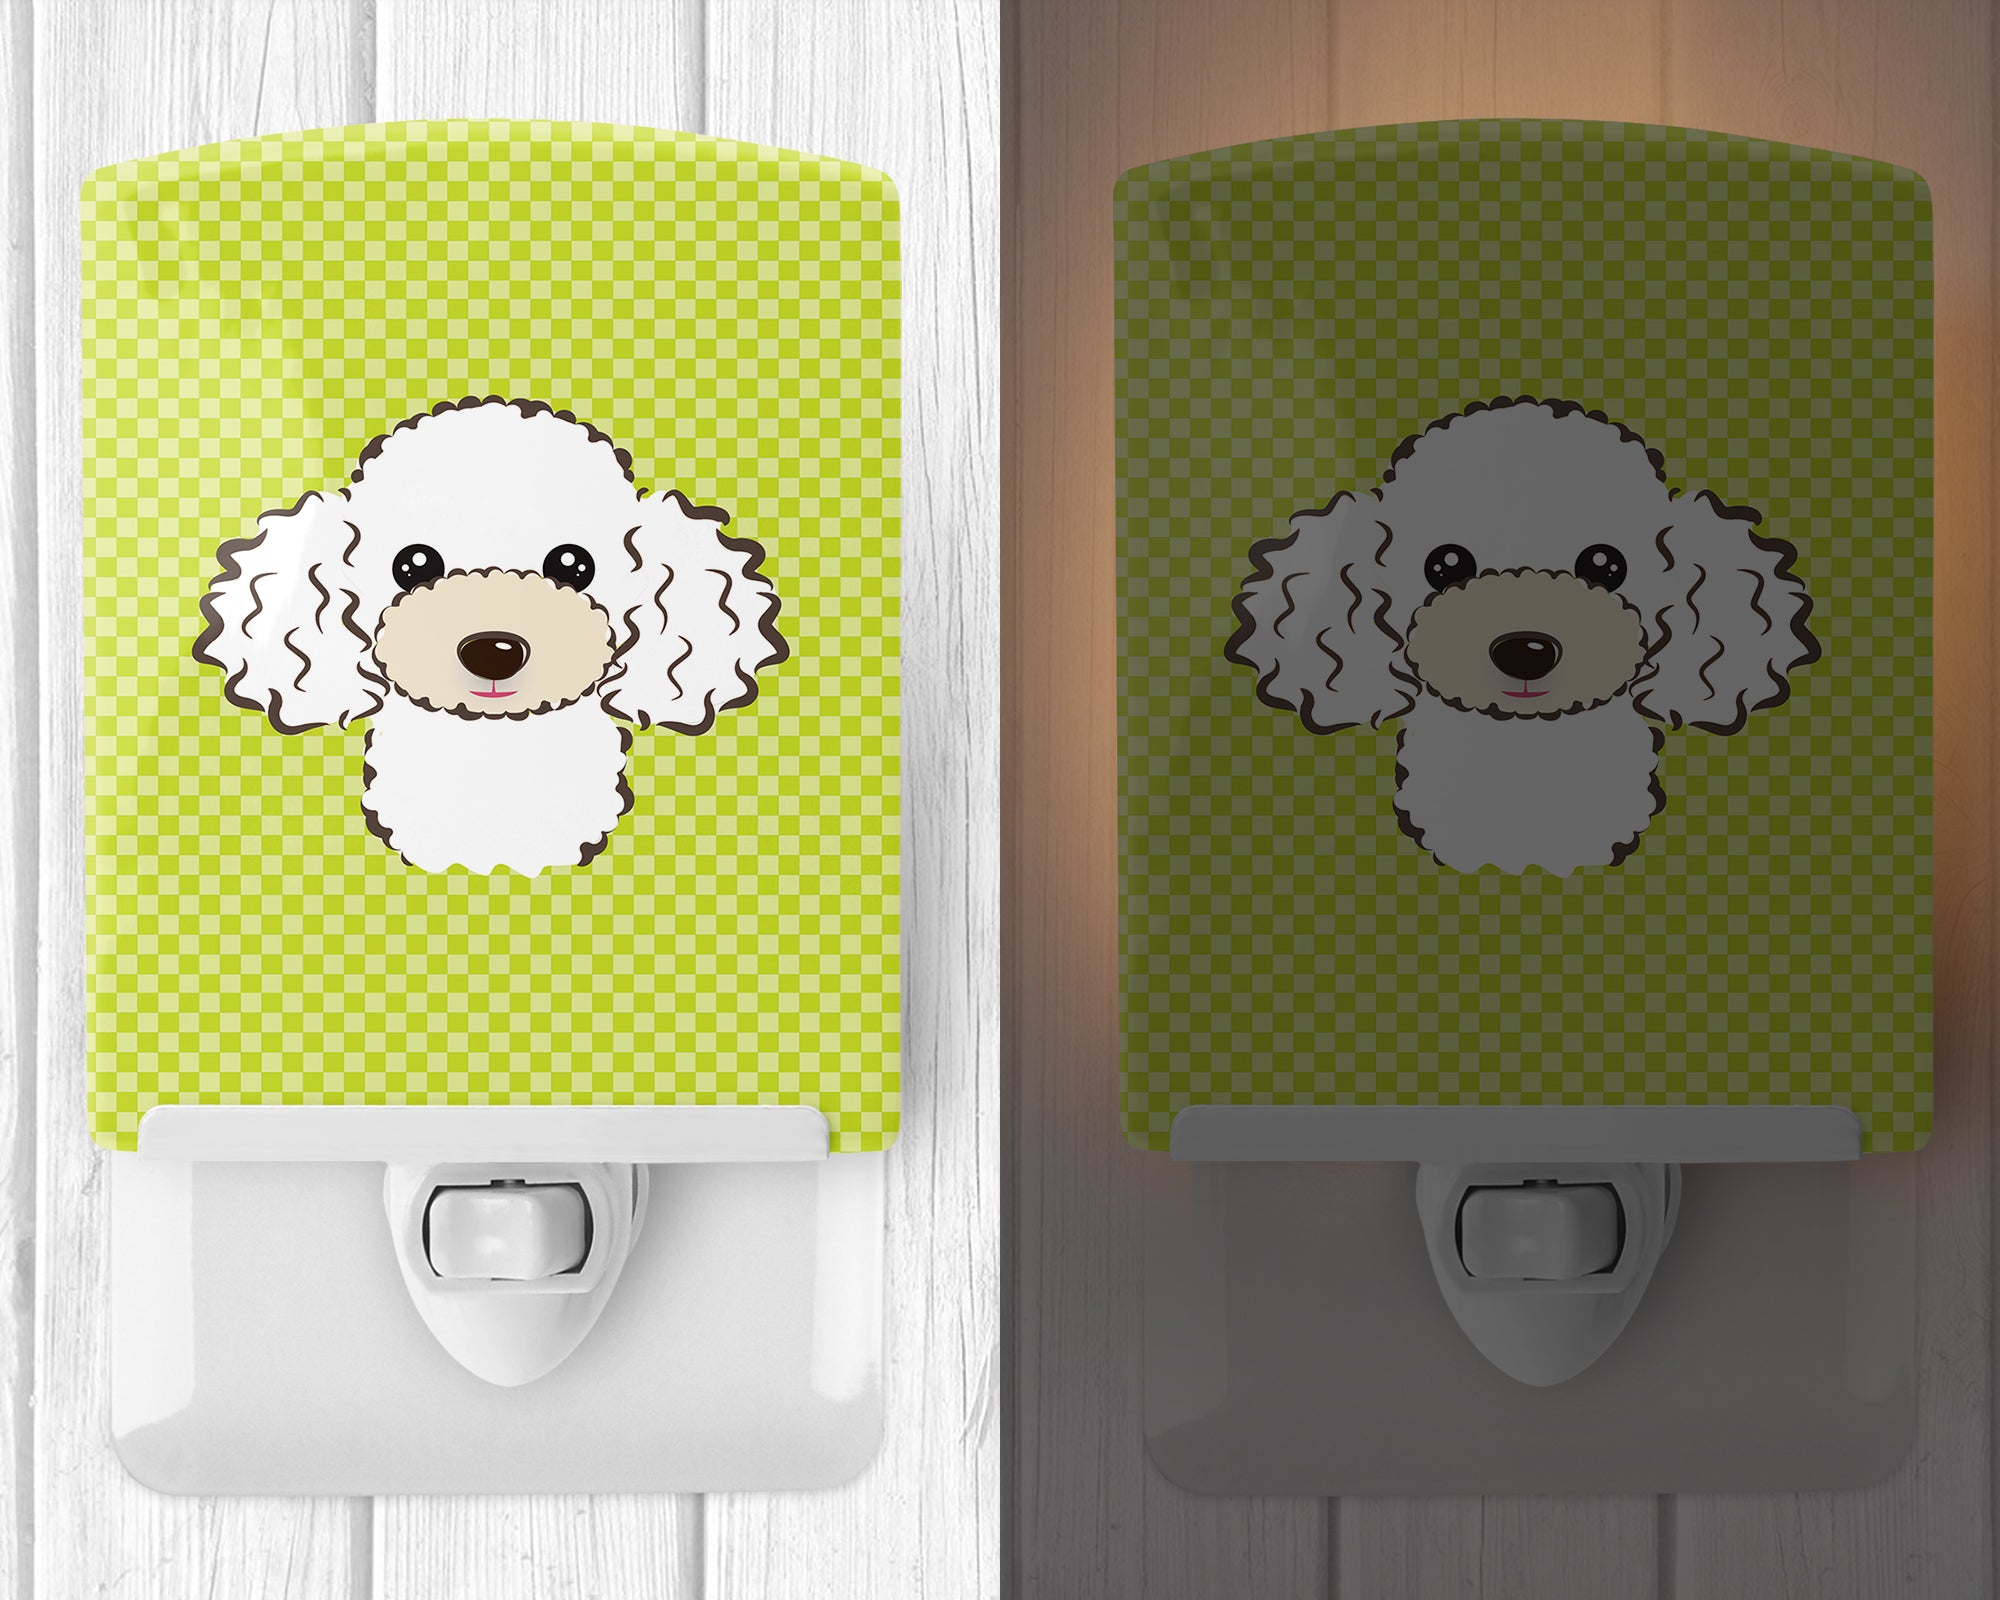 Checkerboard Lime Green White Poodle Ceramic Night Light BB1319CNL - the-store.com